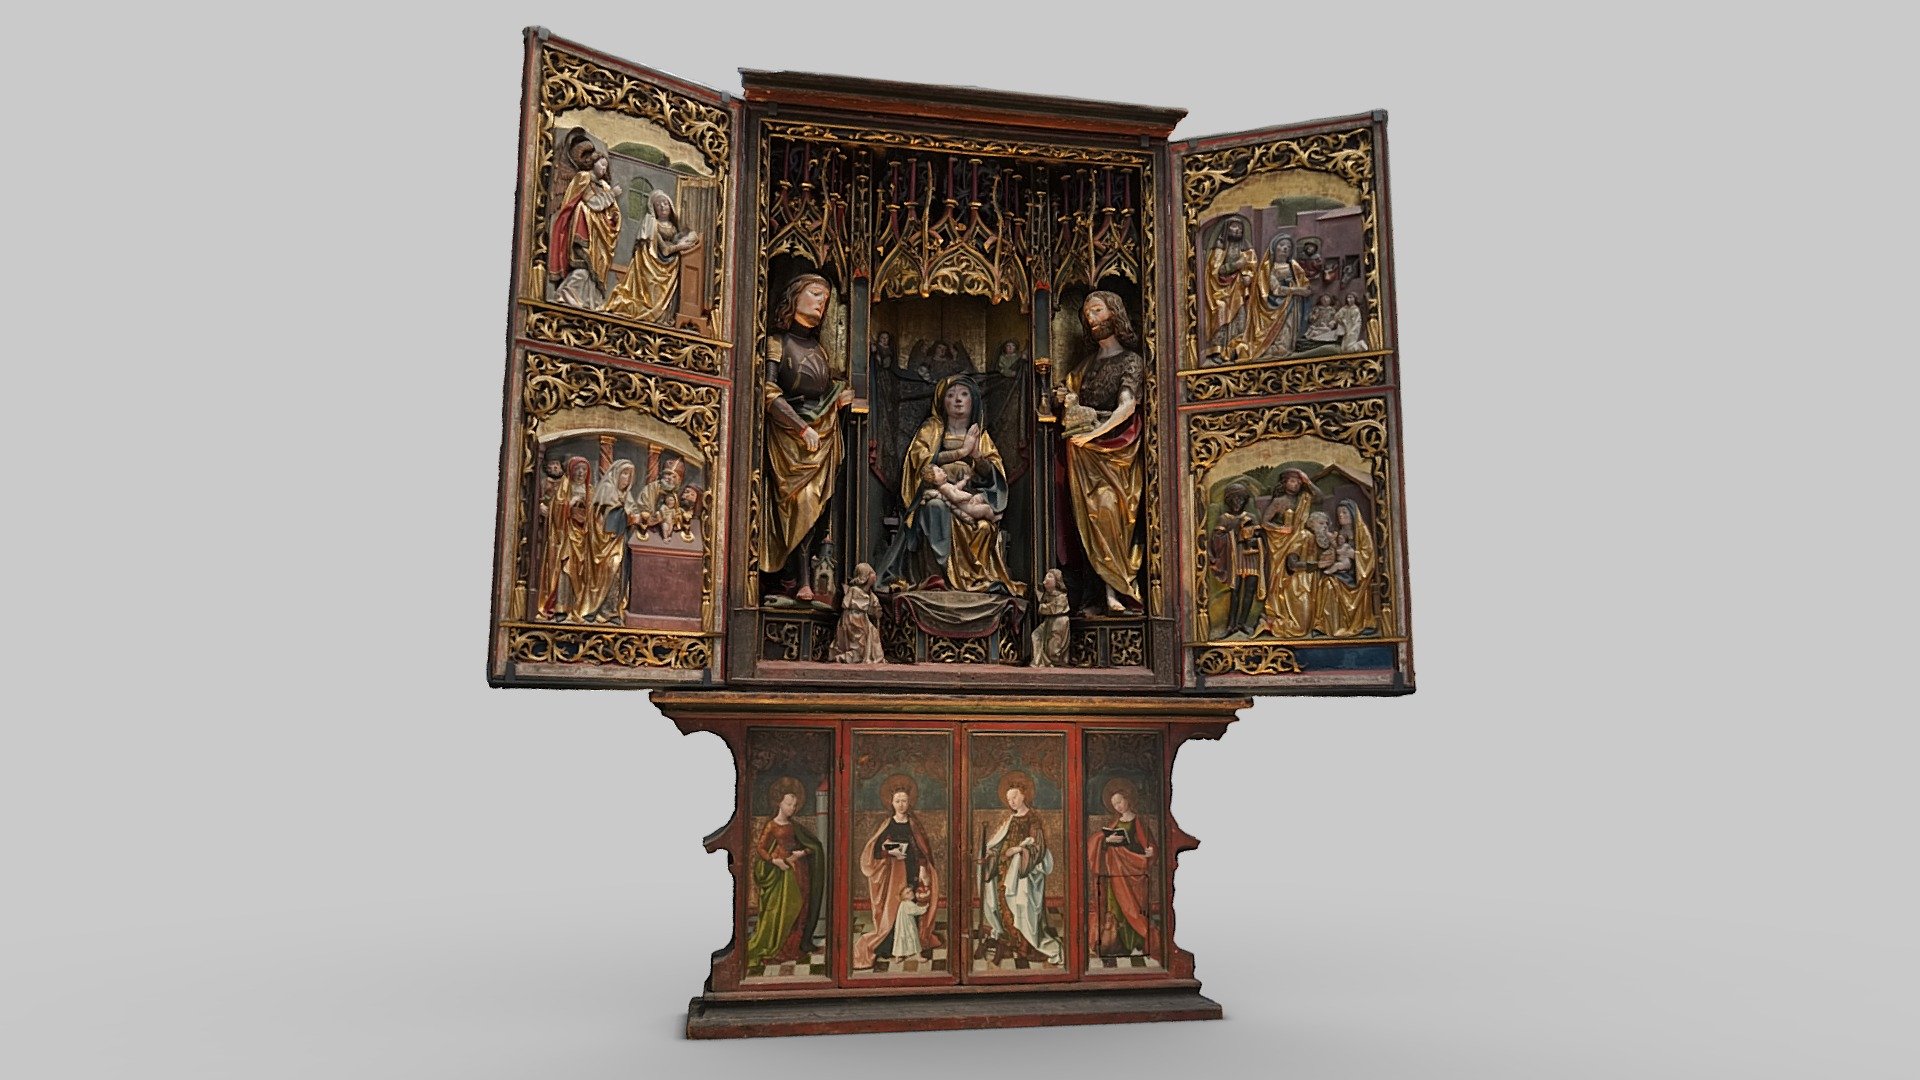 A wooden altarpiece from the church of St Andrew in Klausen near Brixen (now Bressanone, Italy). Located in Room 50b at The Victoria and Albert Museum, London.

Date: 1500-10.

https://collections.vam.ac.uk/item/O70858/winged-altarpiece-altarpiece-potsch-rupert/

105 photos taken in November 2022 with a Sony a7R III and processed in Reality Capture 3d model